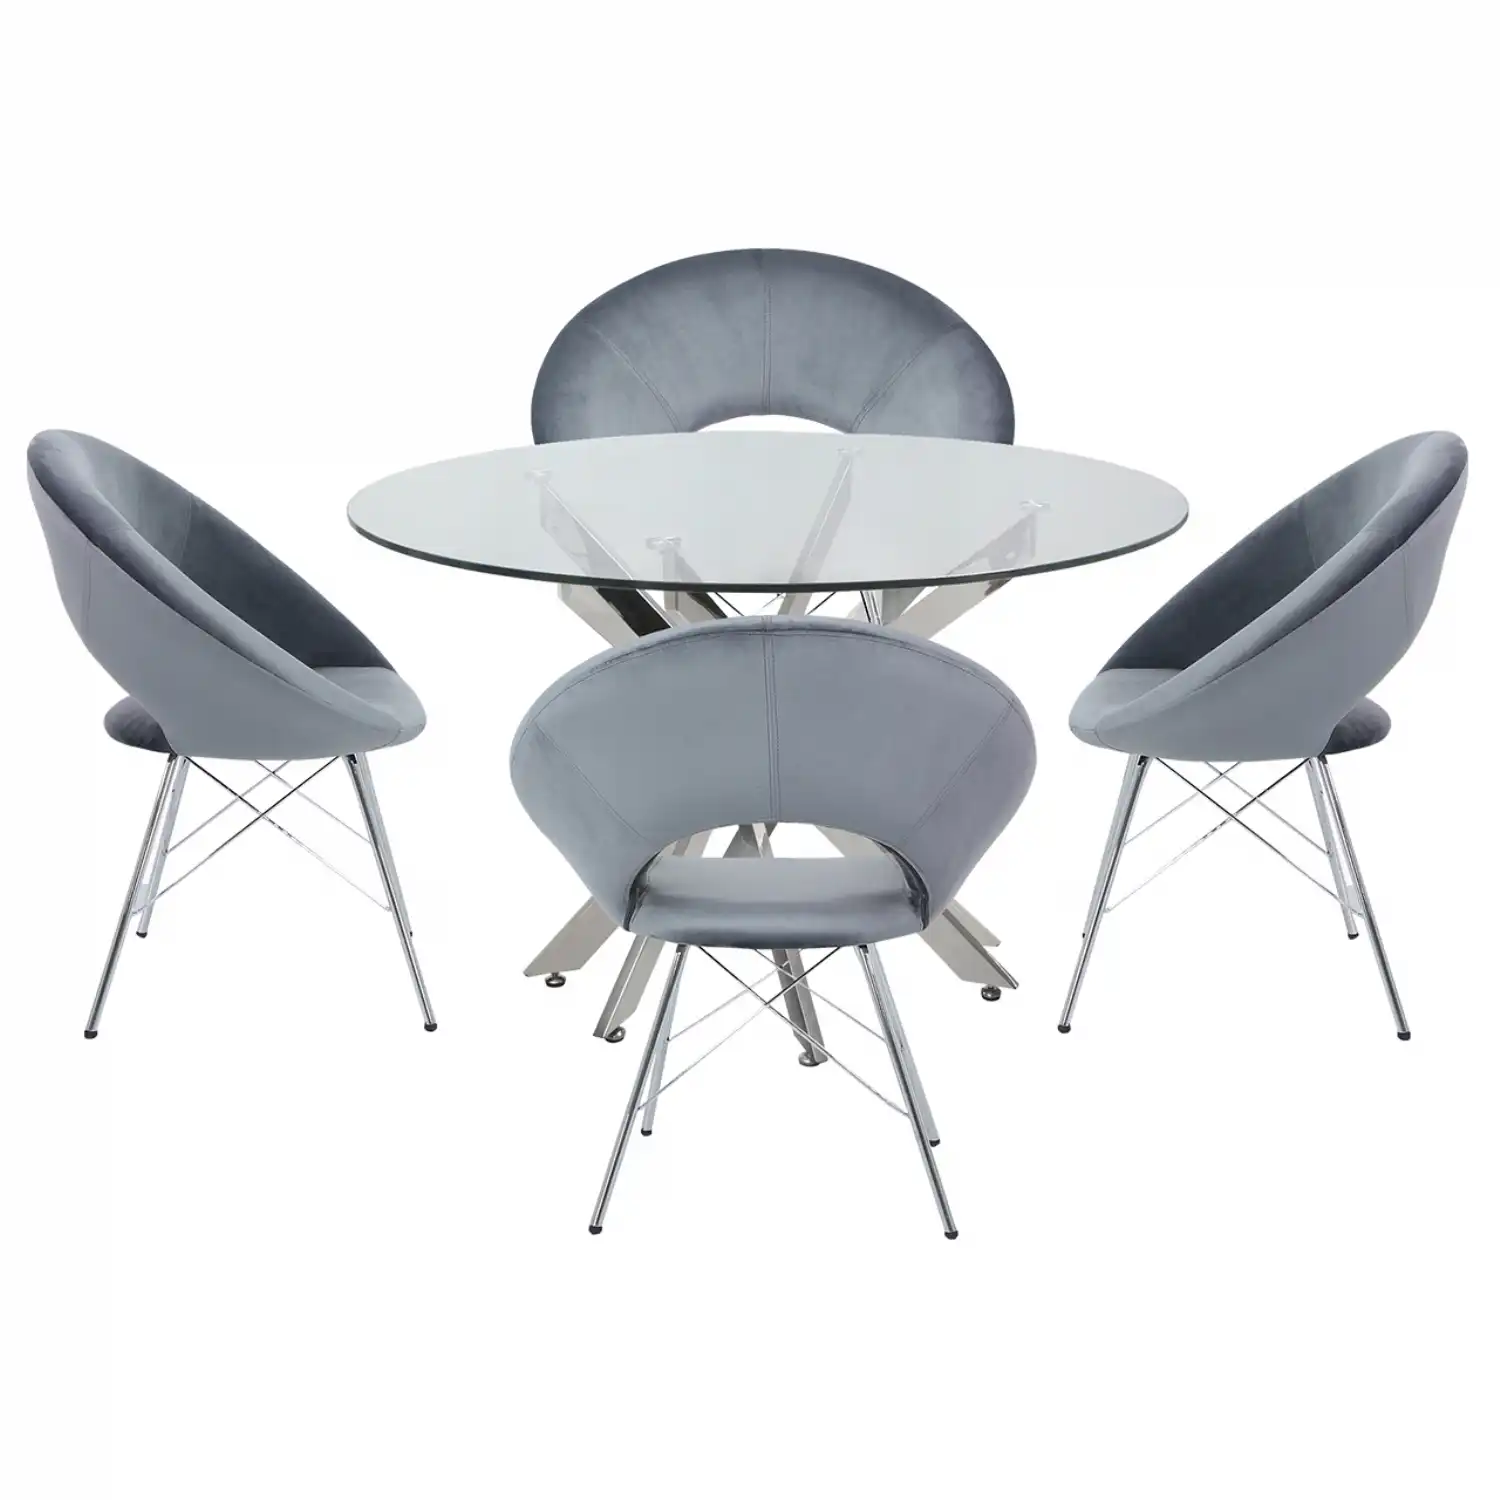 130cm Round Dining Set 4 Grey Orb Chairs